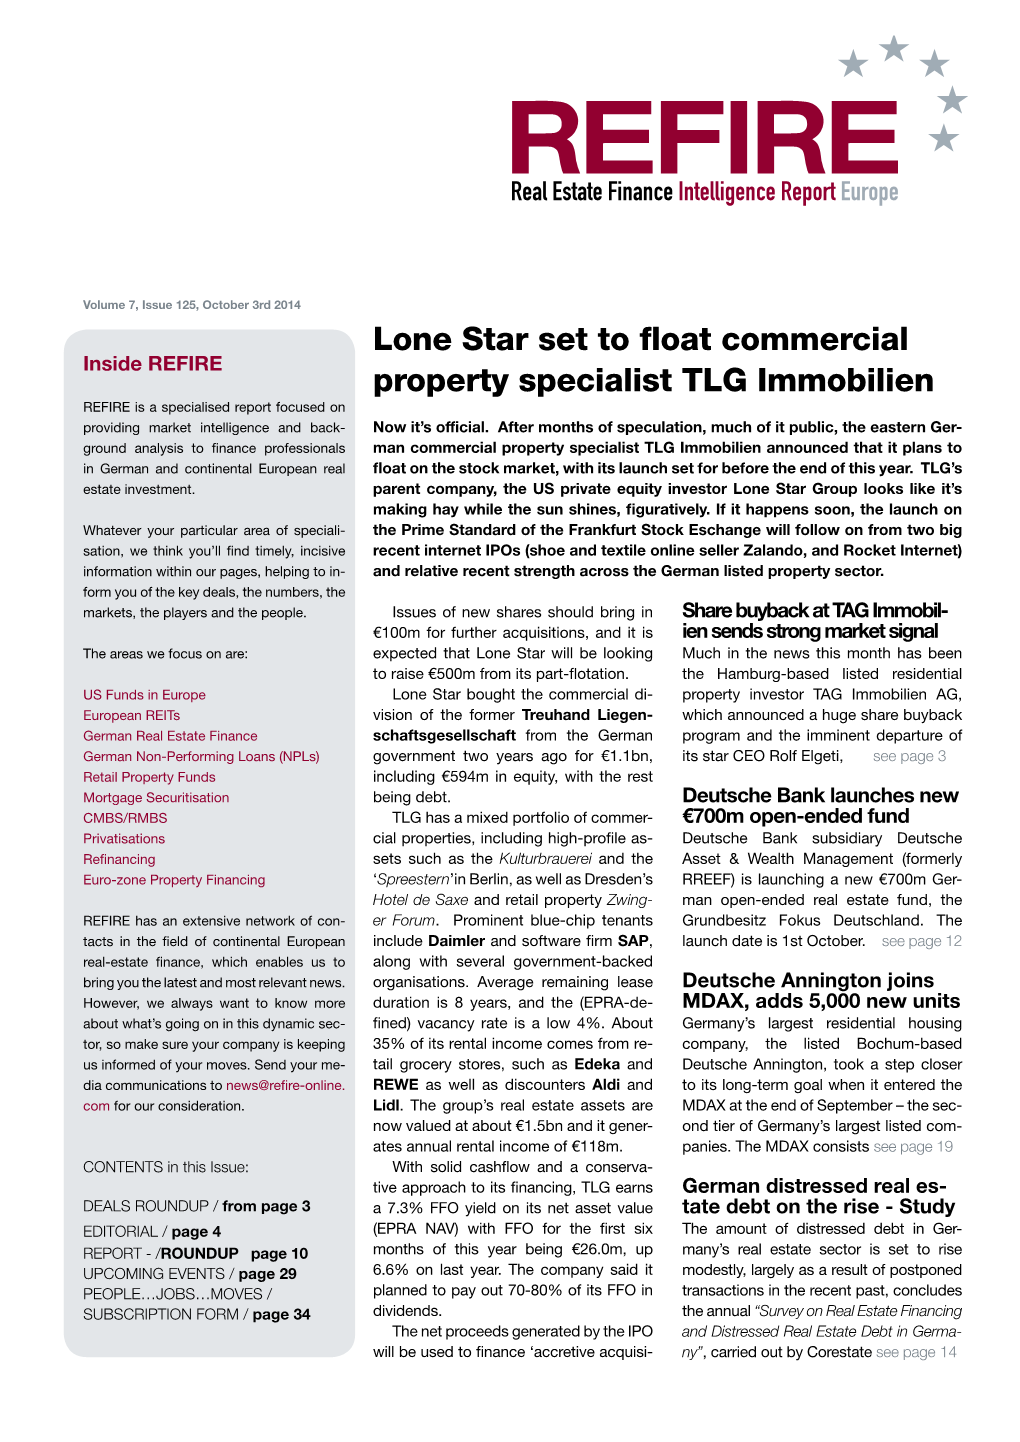 Lone Star Set to Float Commercial Property Specialist TLG Immobilien